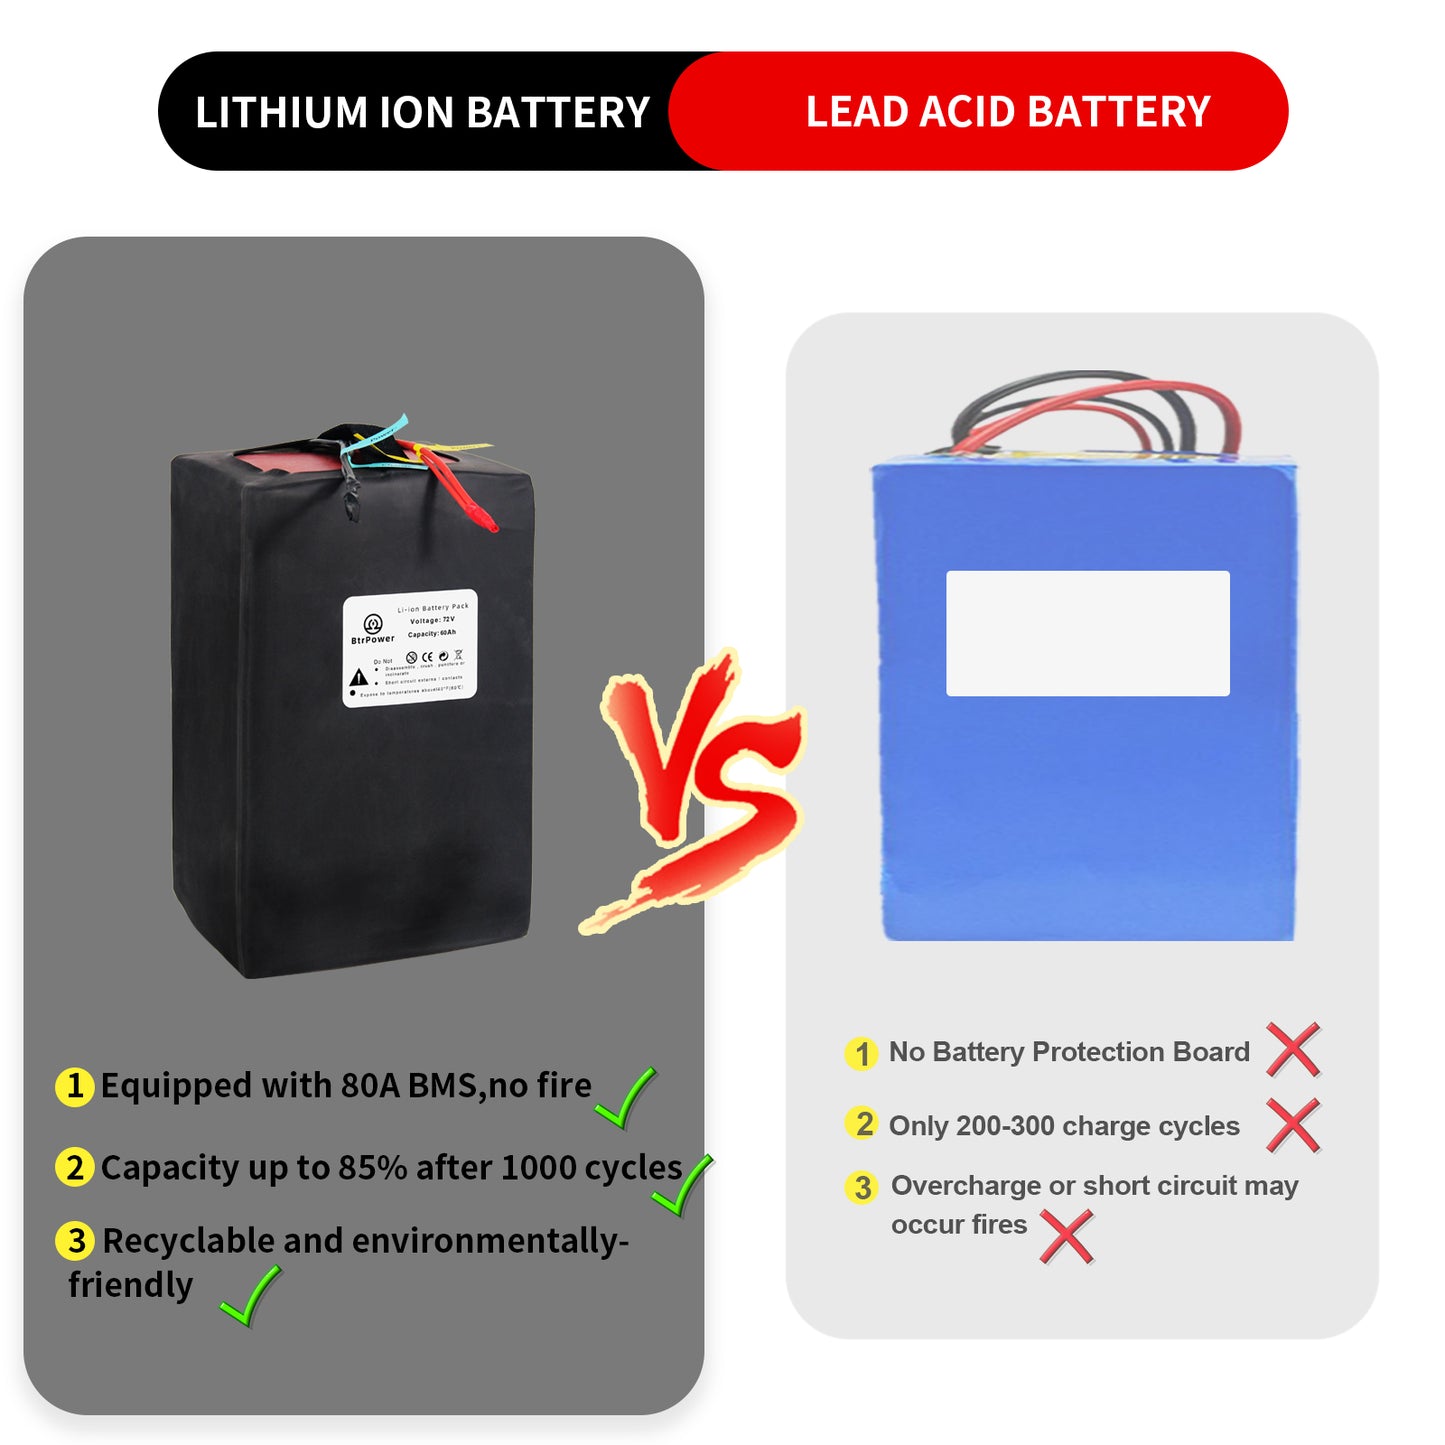 72V 60Ah Lithium Li-ion Battery Pack for 500W-5000W EBike Electric Scooter BMS